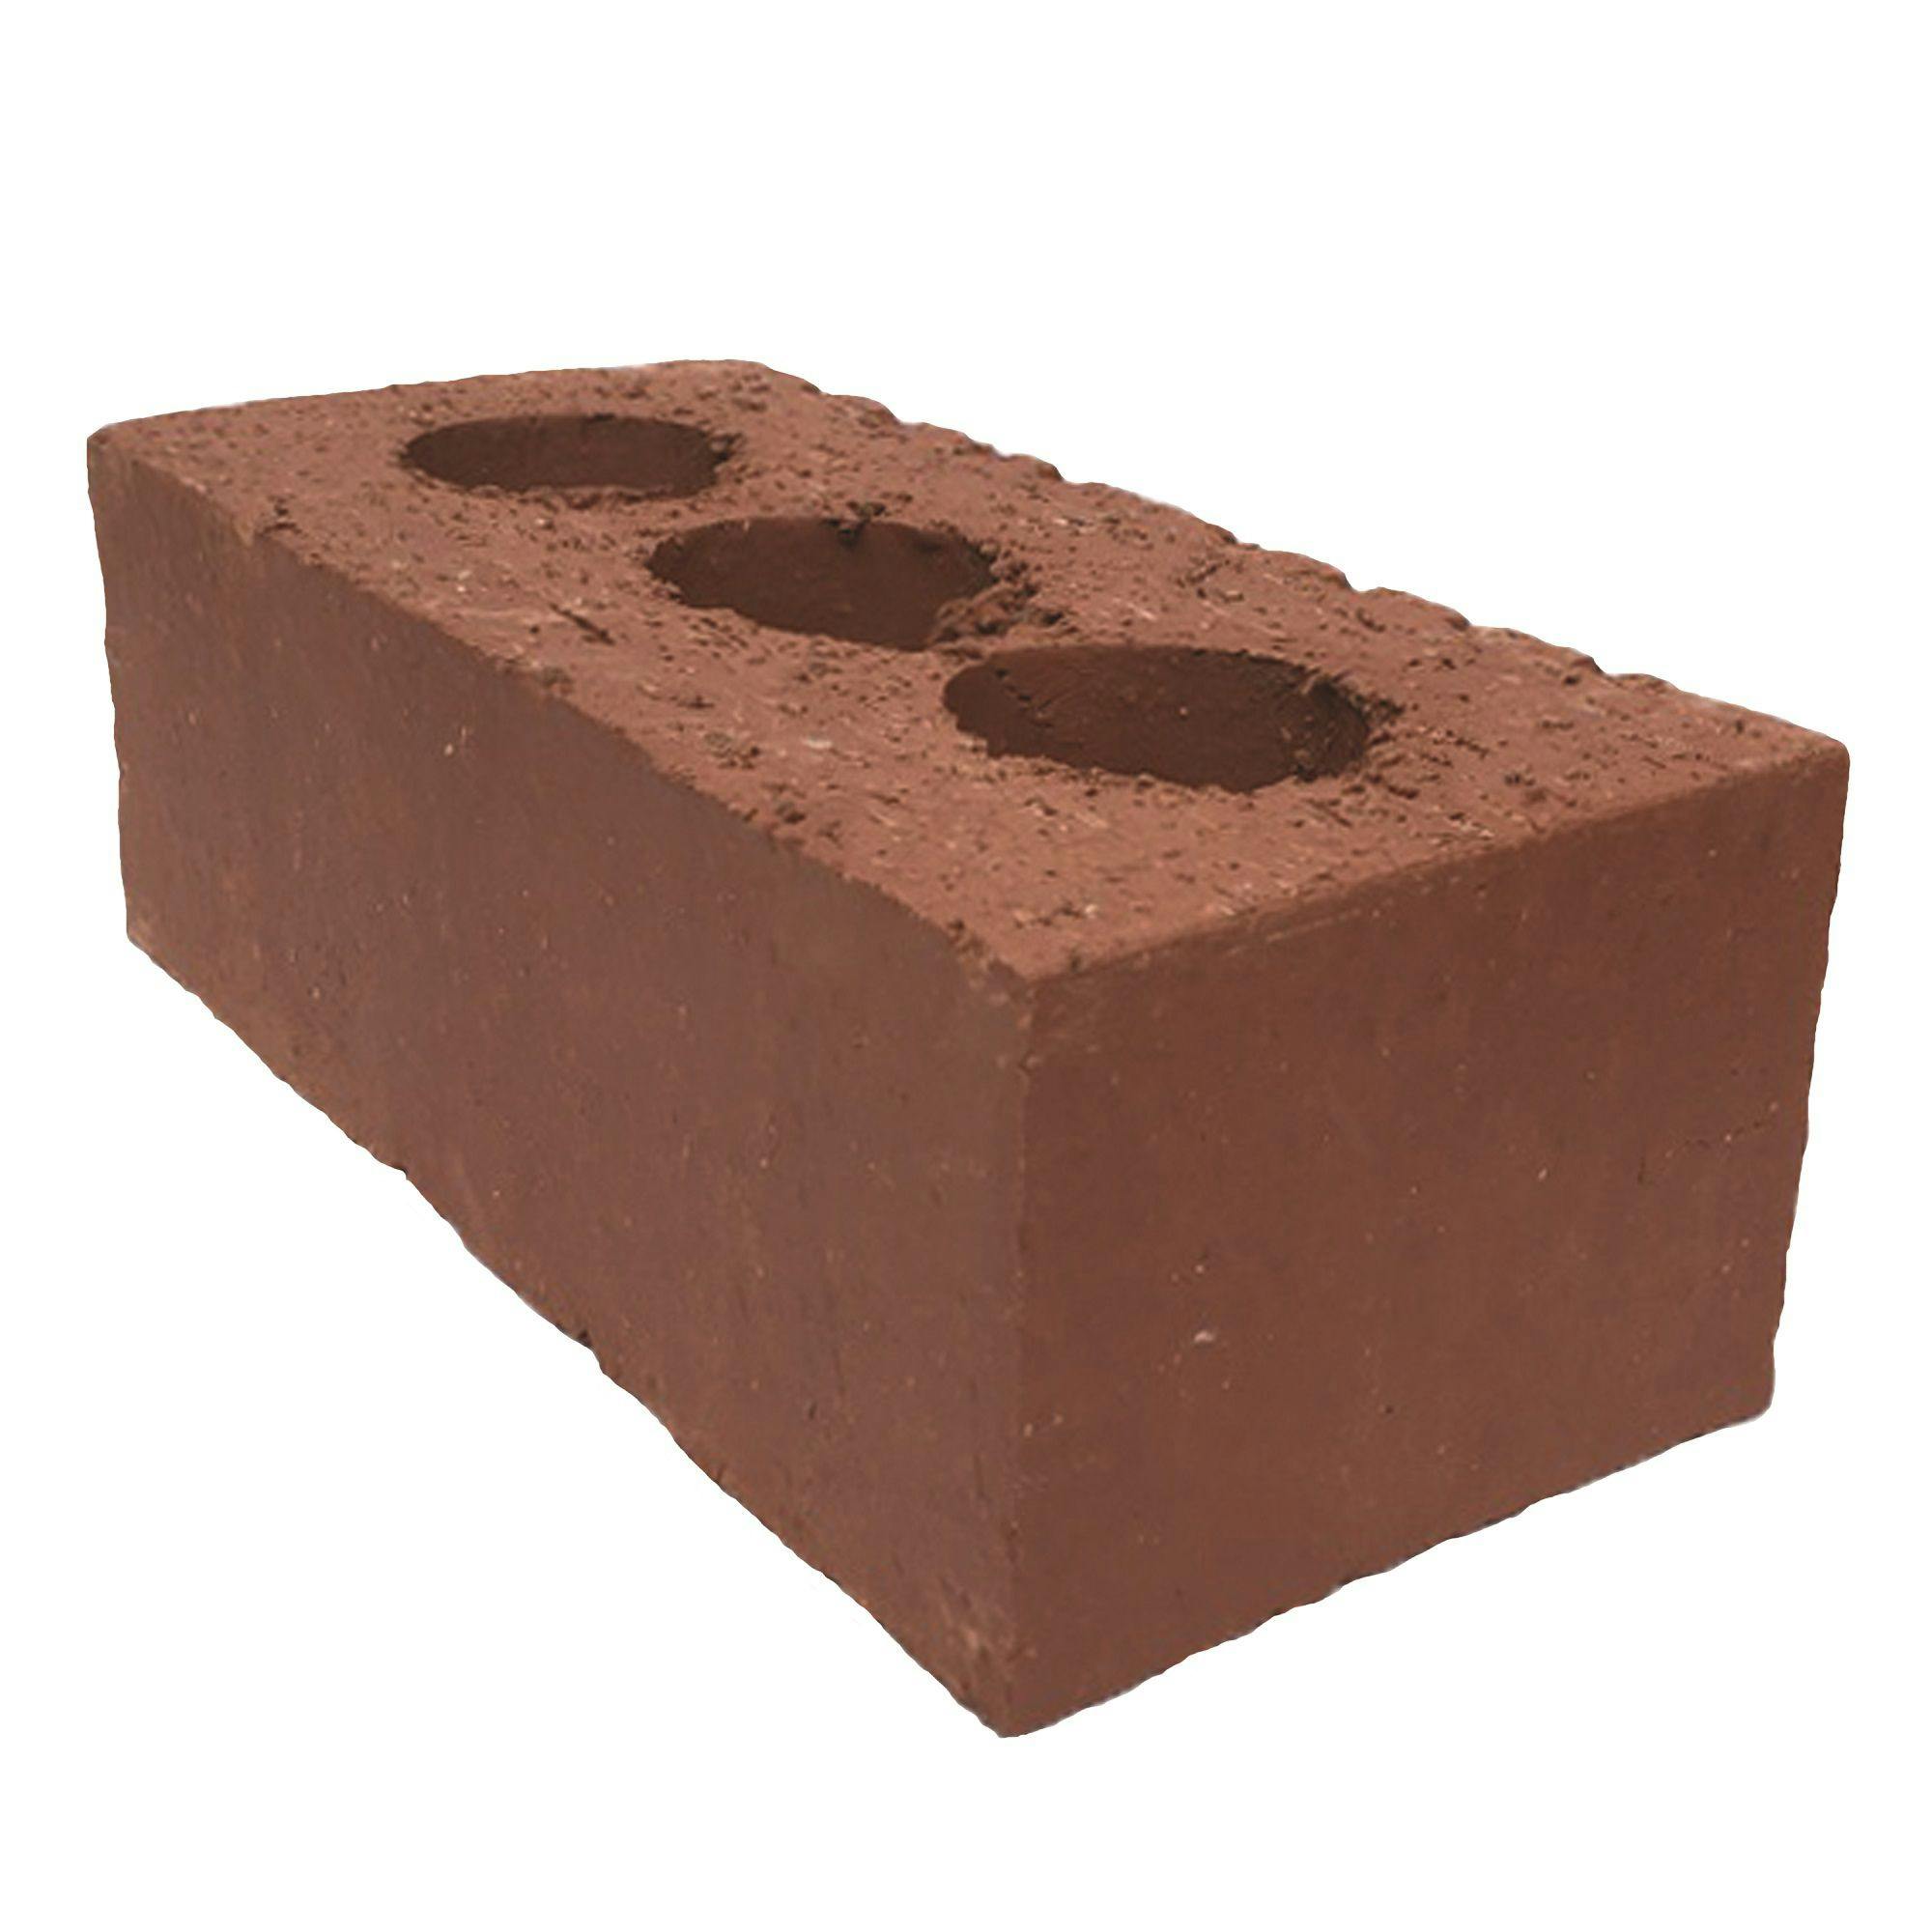 Itwb Smooth Red Class B Engineering Brick (L)215mm (W)102.5mm (H)65mm, Pack Of 452